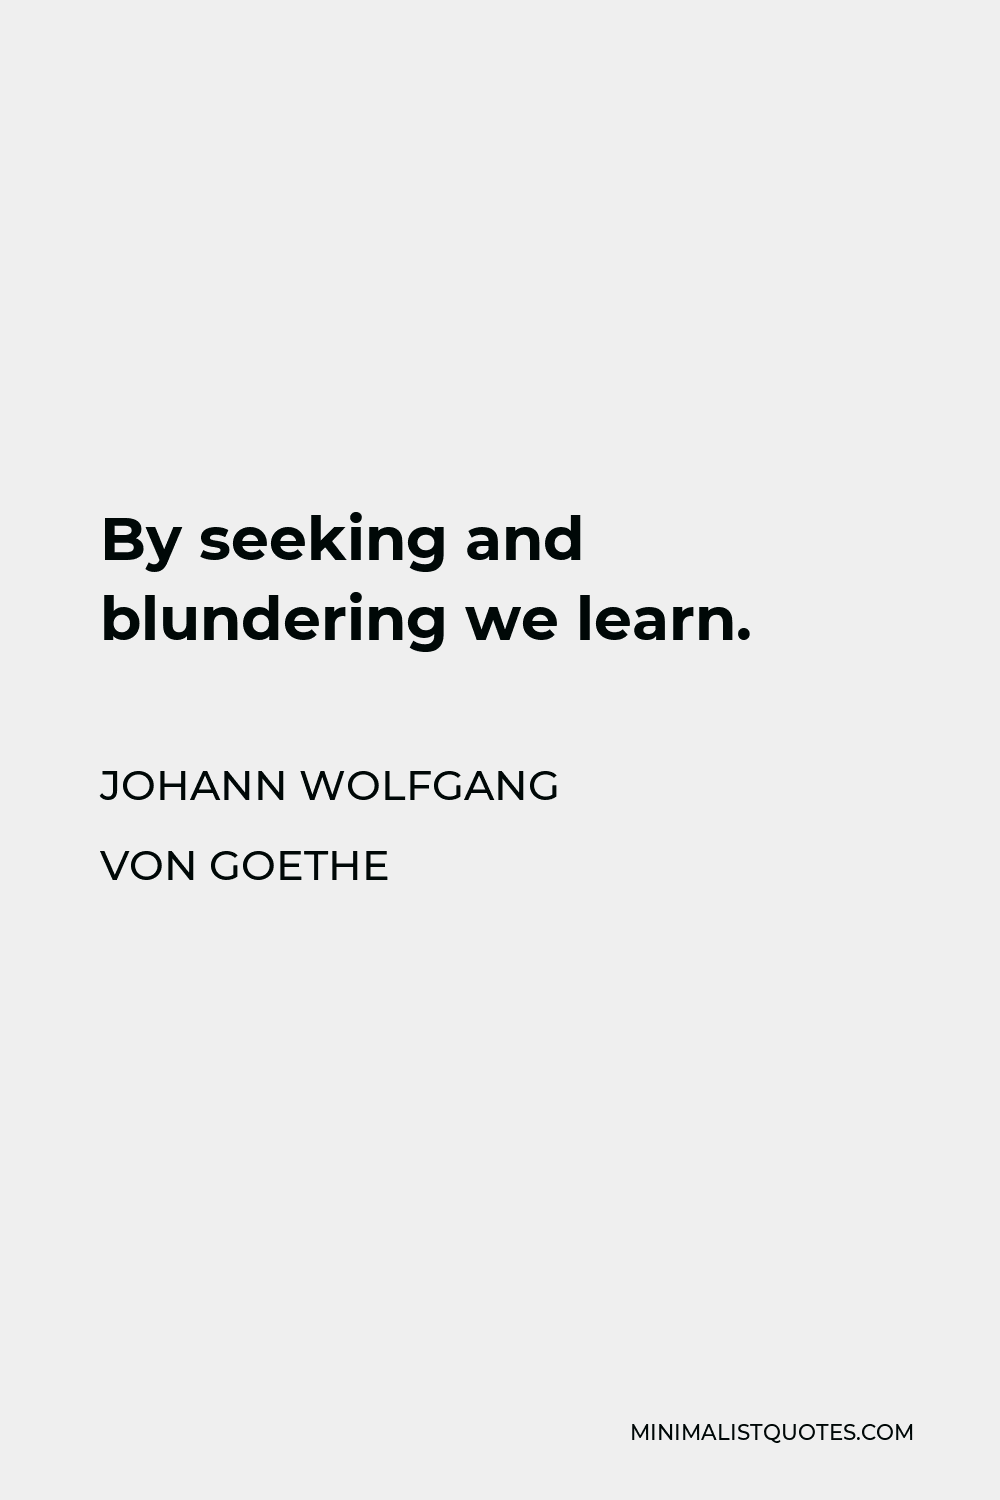 Johann Wolfgang von Goethe Quote: “By seeking and blundering we learn.”